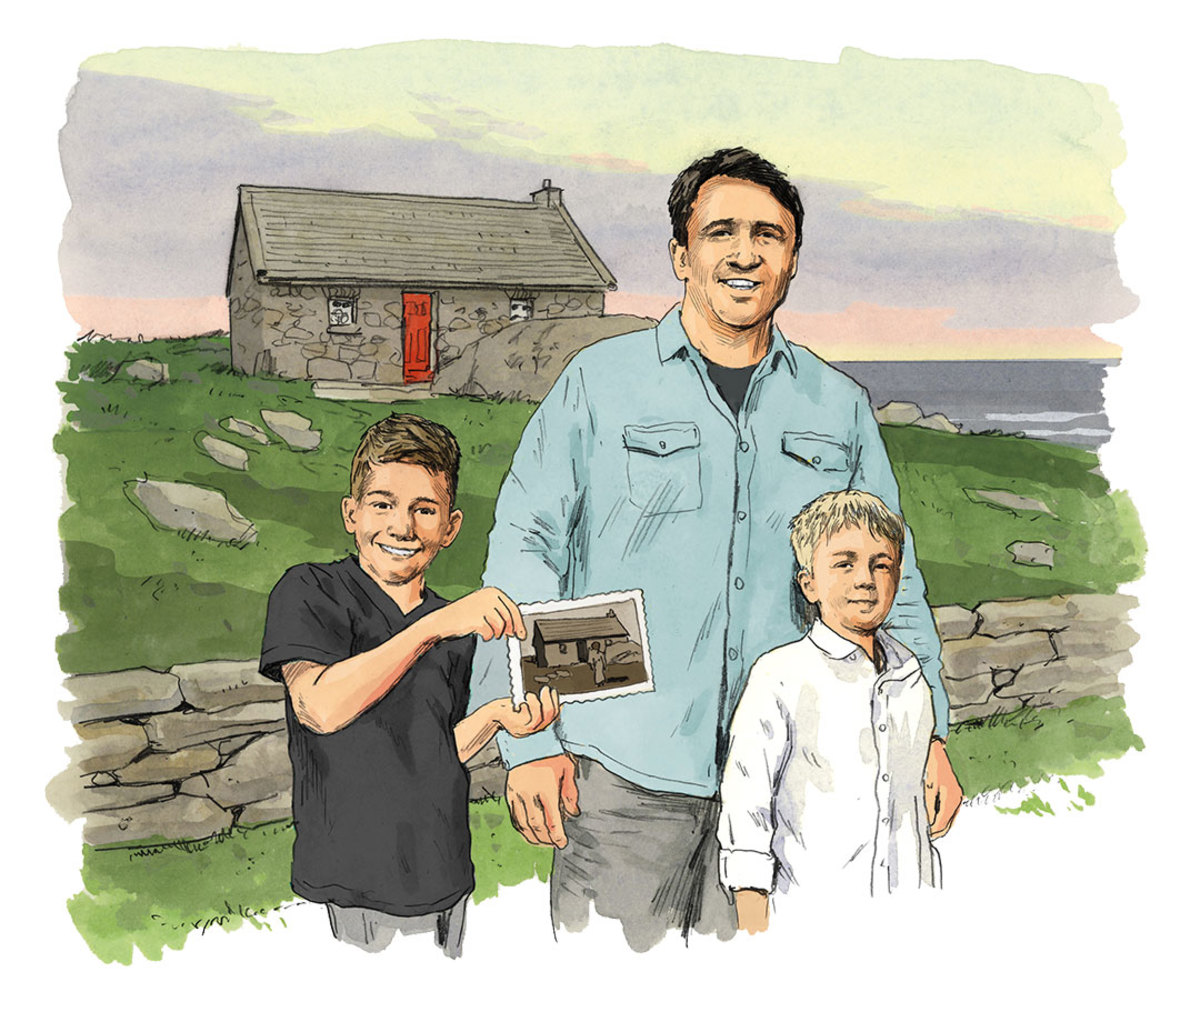 Illustration of man and two young boys standing in front of house